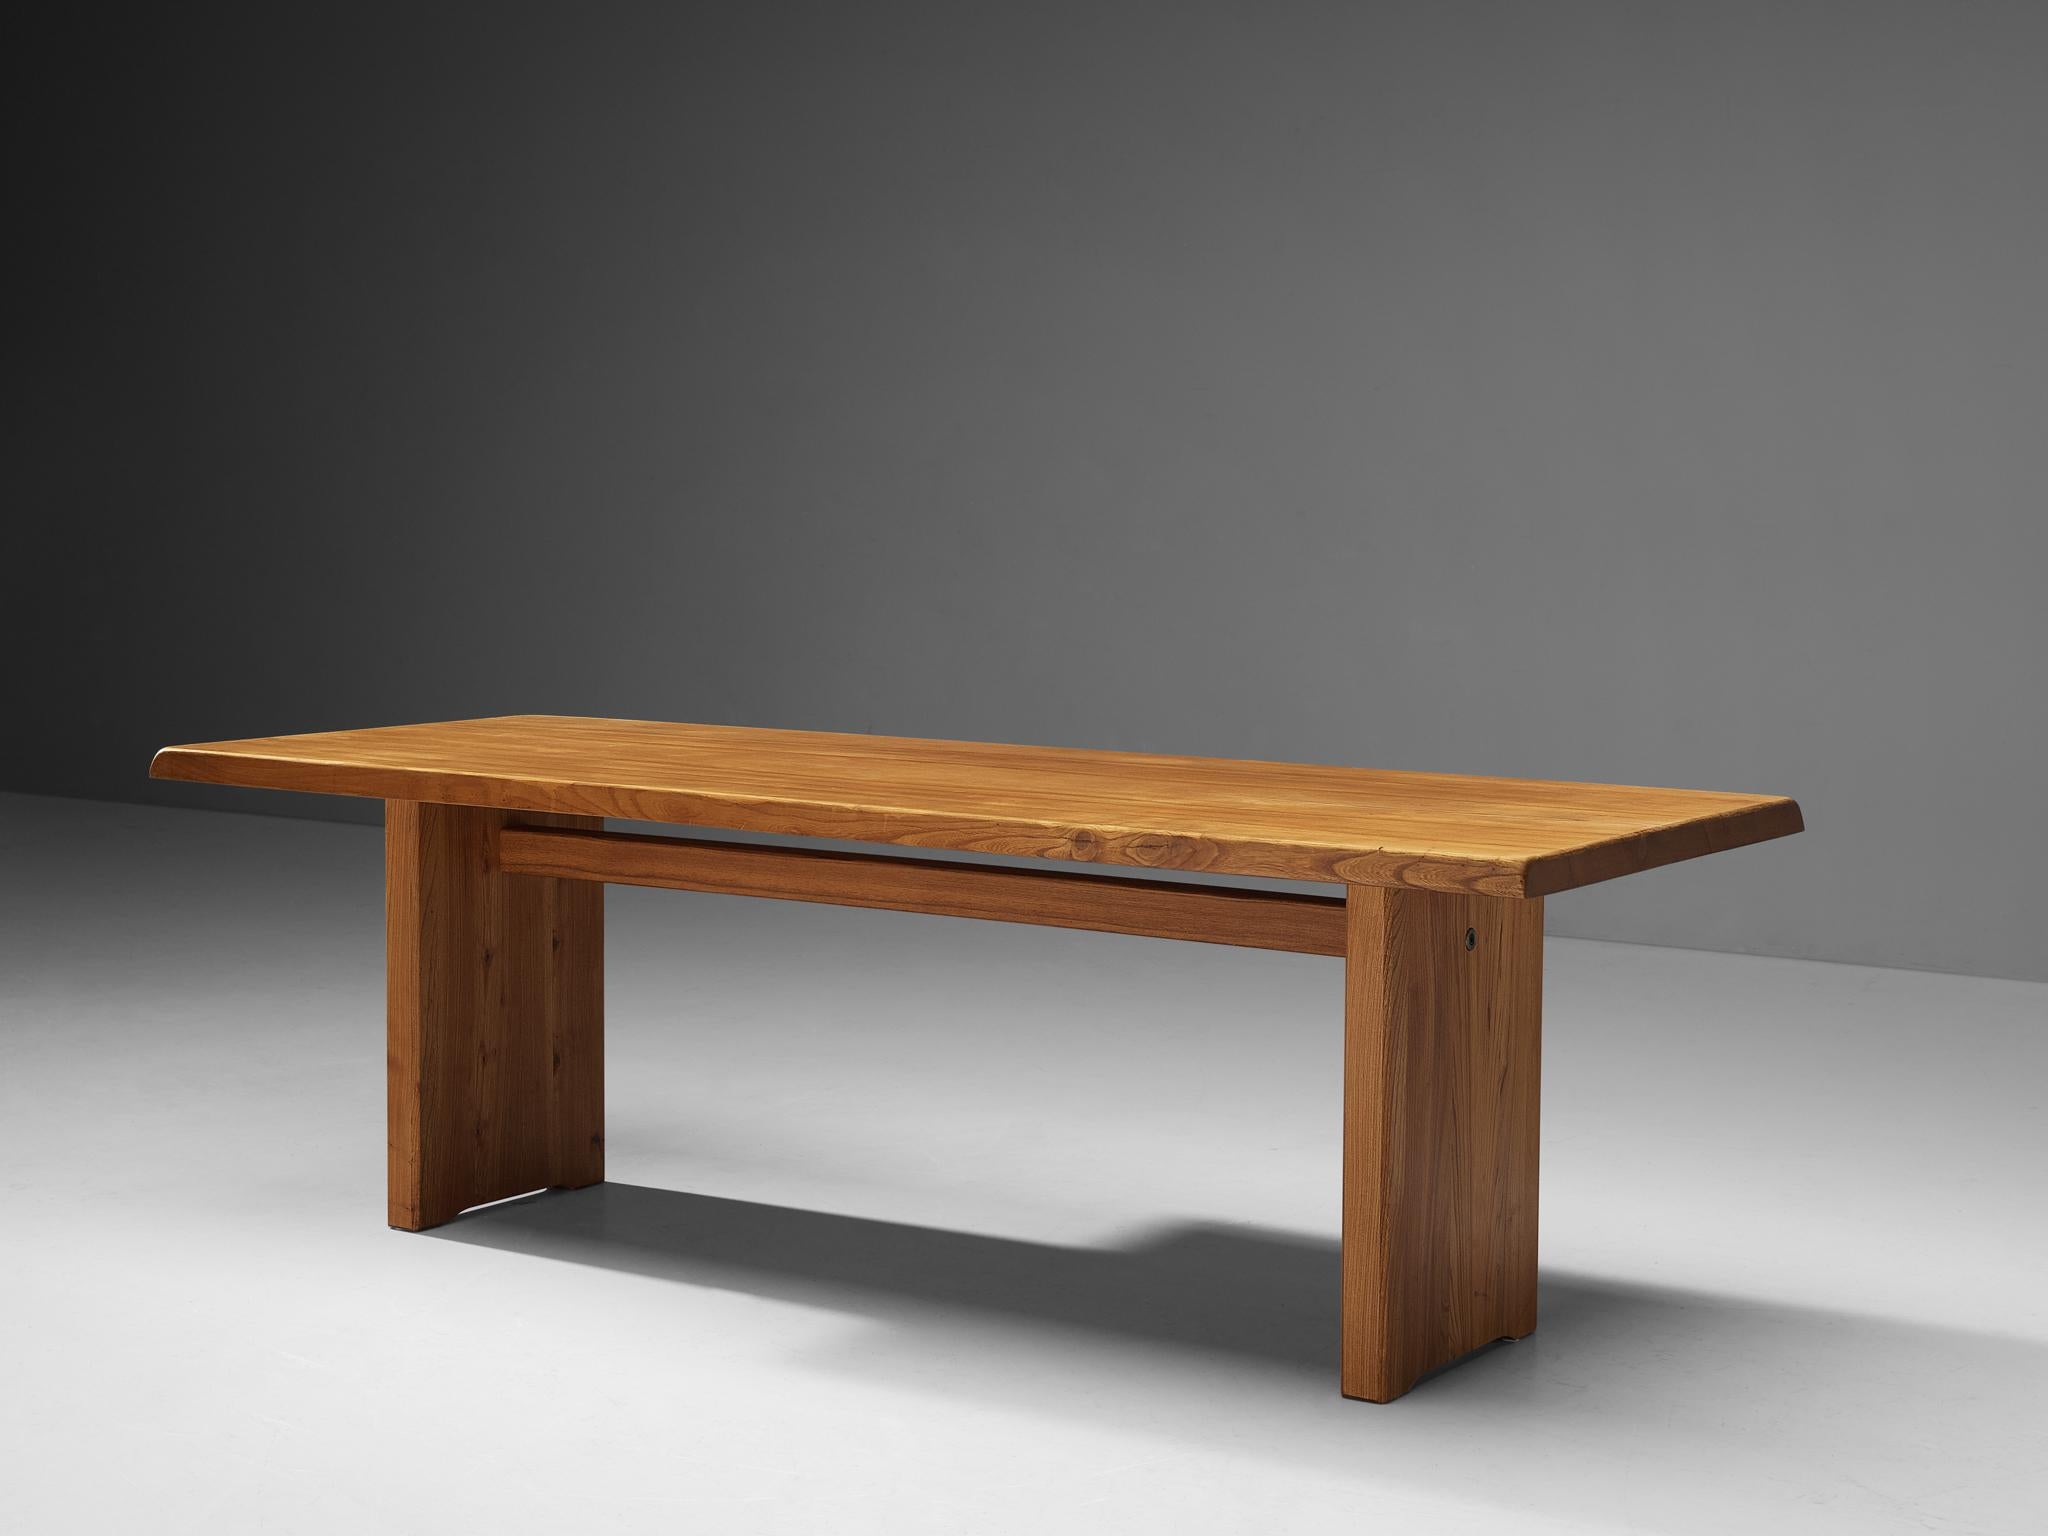 Pierre Chapo, dining table,  model 'T14D', elm, France, 1960s. Width: 224cm/7.4 ft

This table is an early edition, created according to the original craft methodology of Pierre Chapo. The rectangular tabletop with sloping edges rests on a